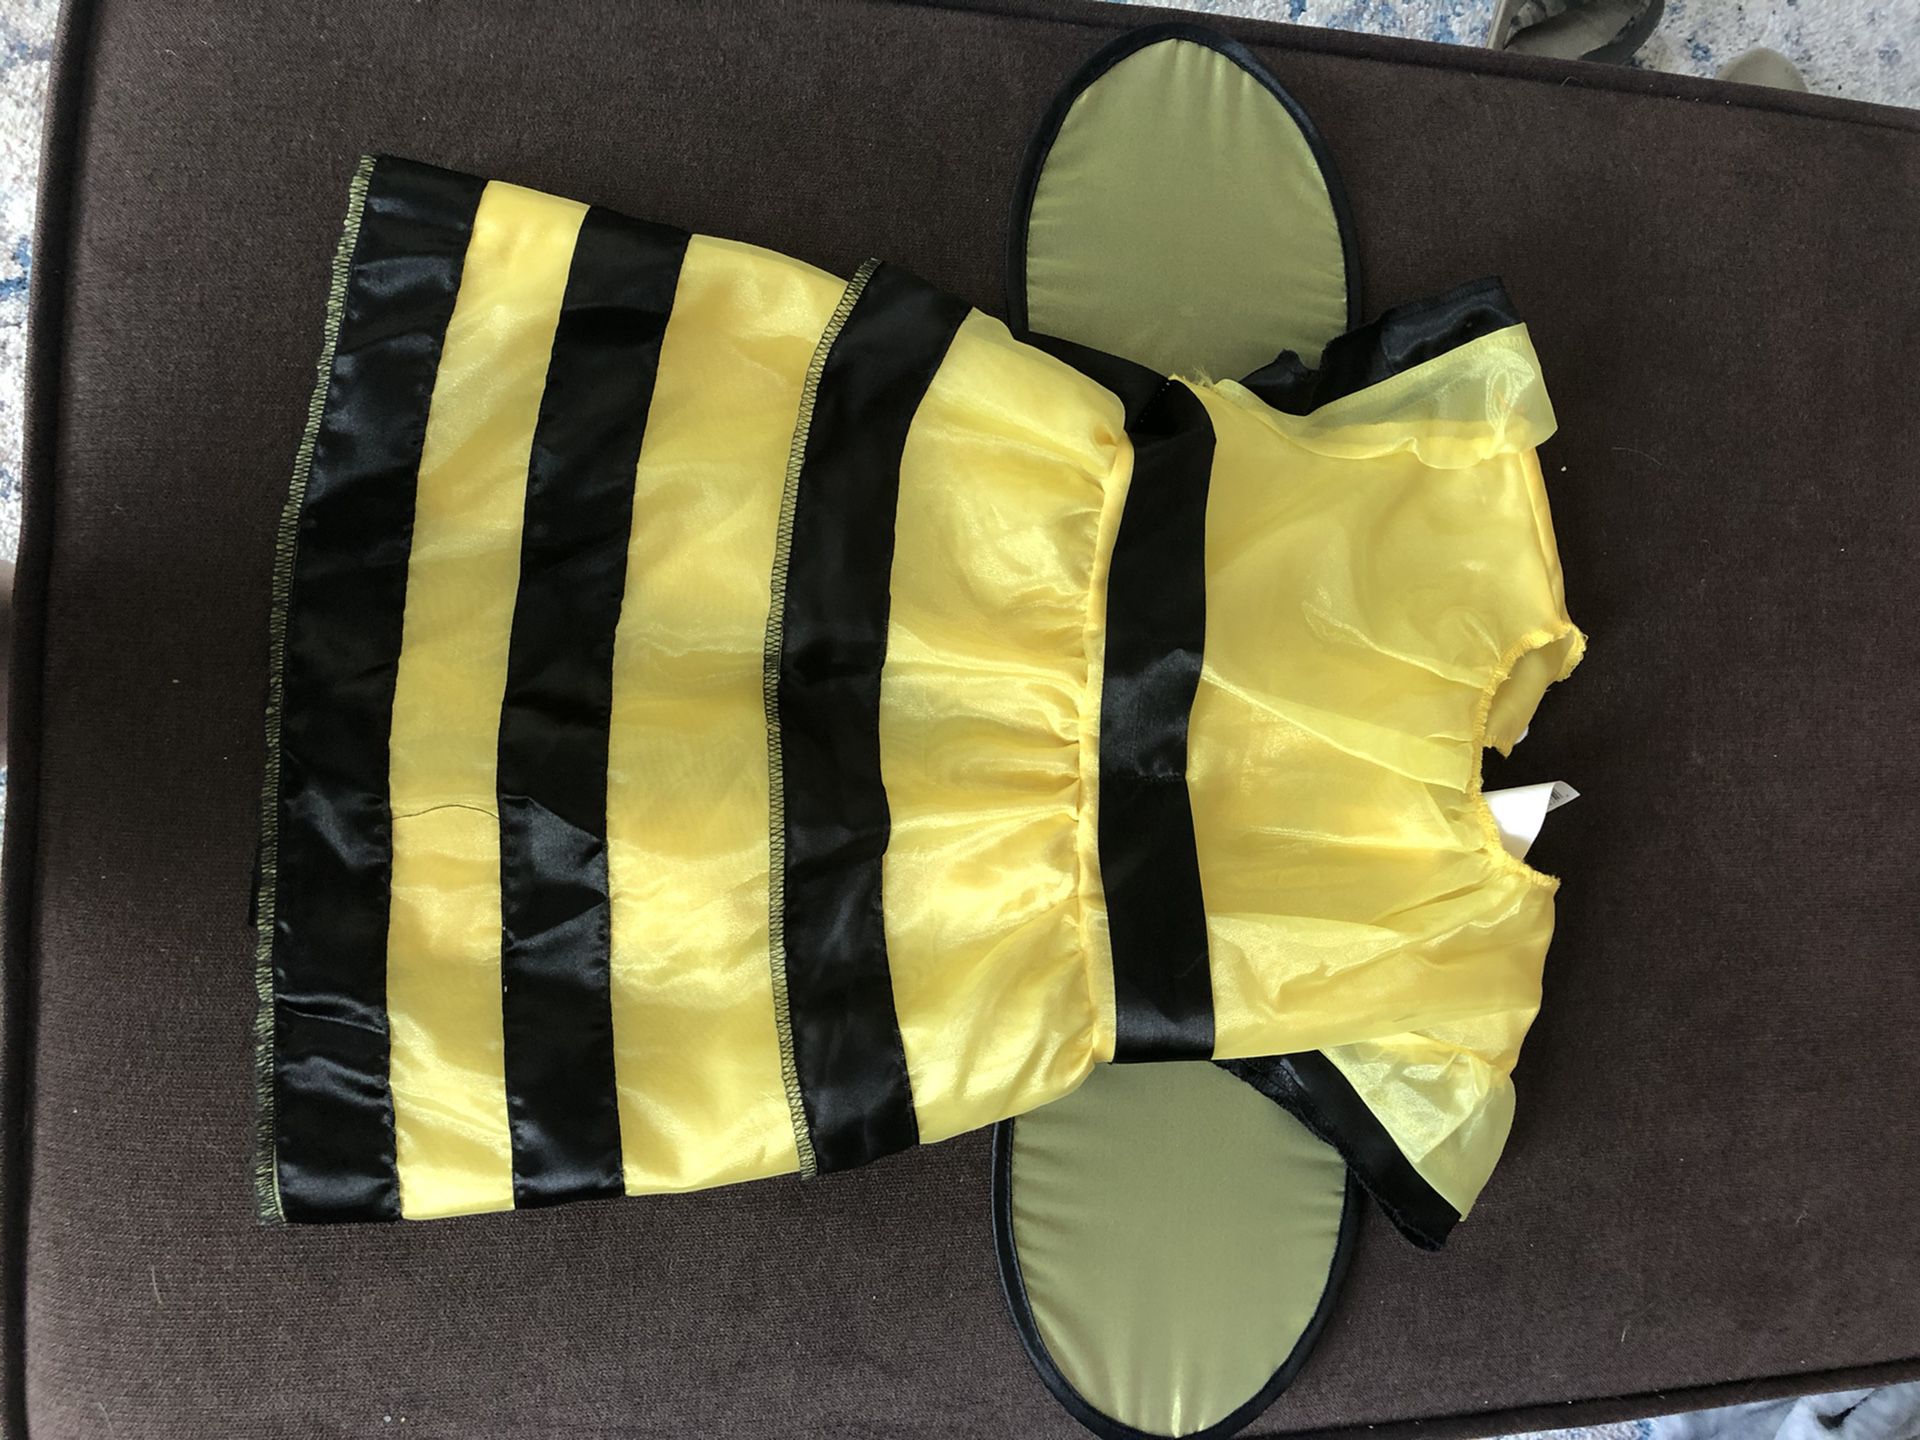 Bumble bee toddler costume